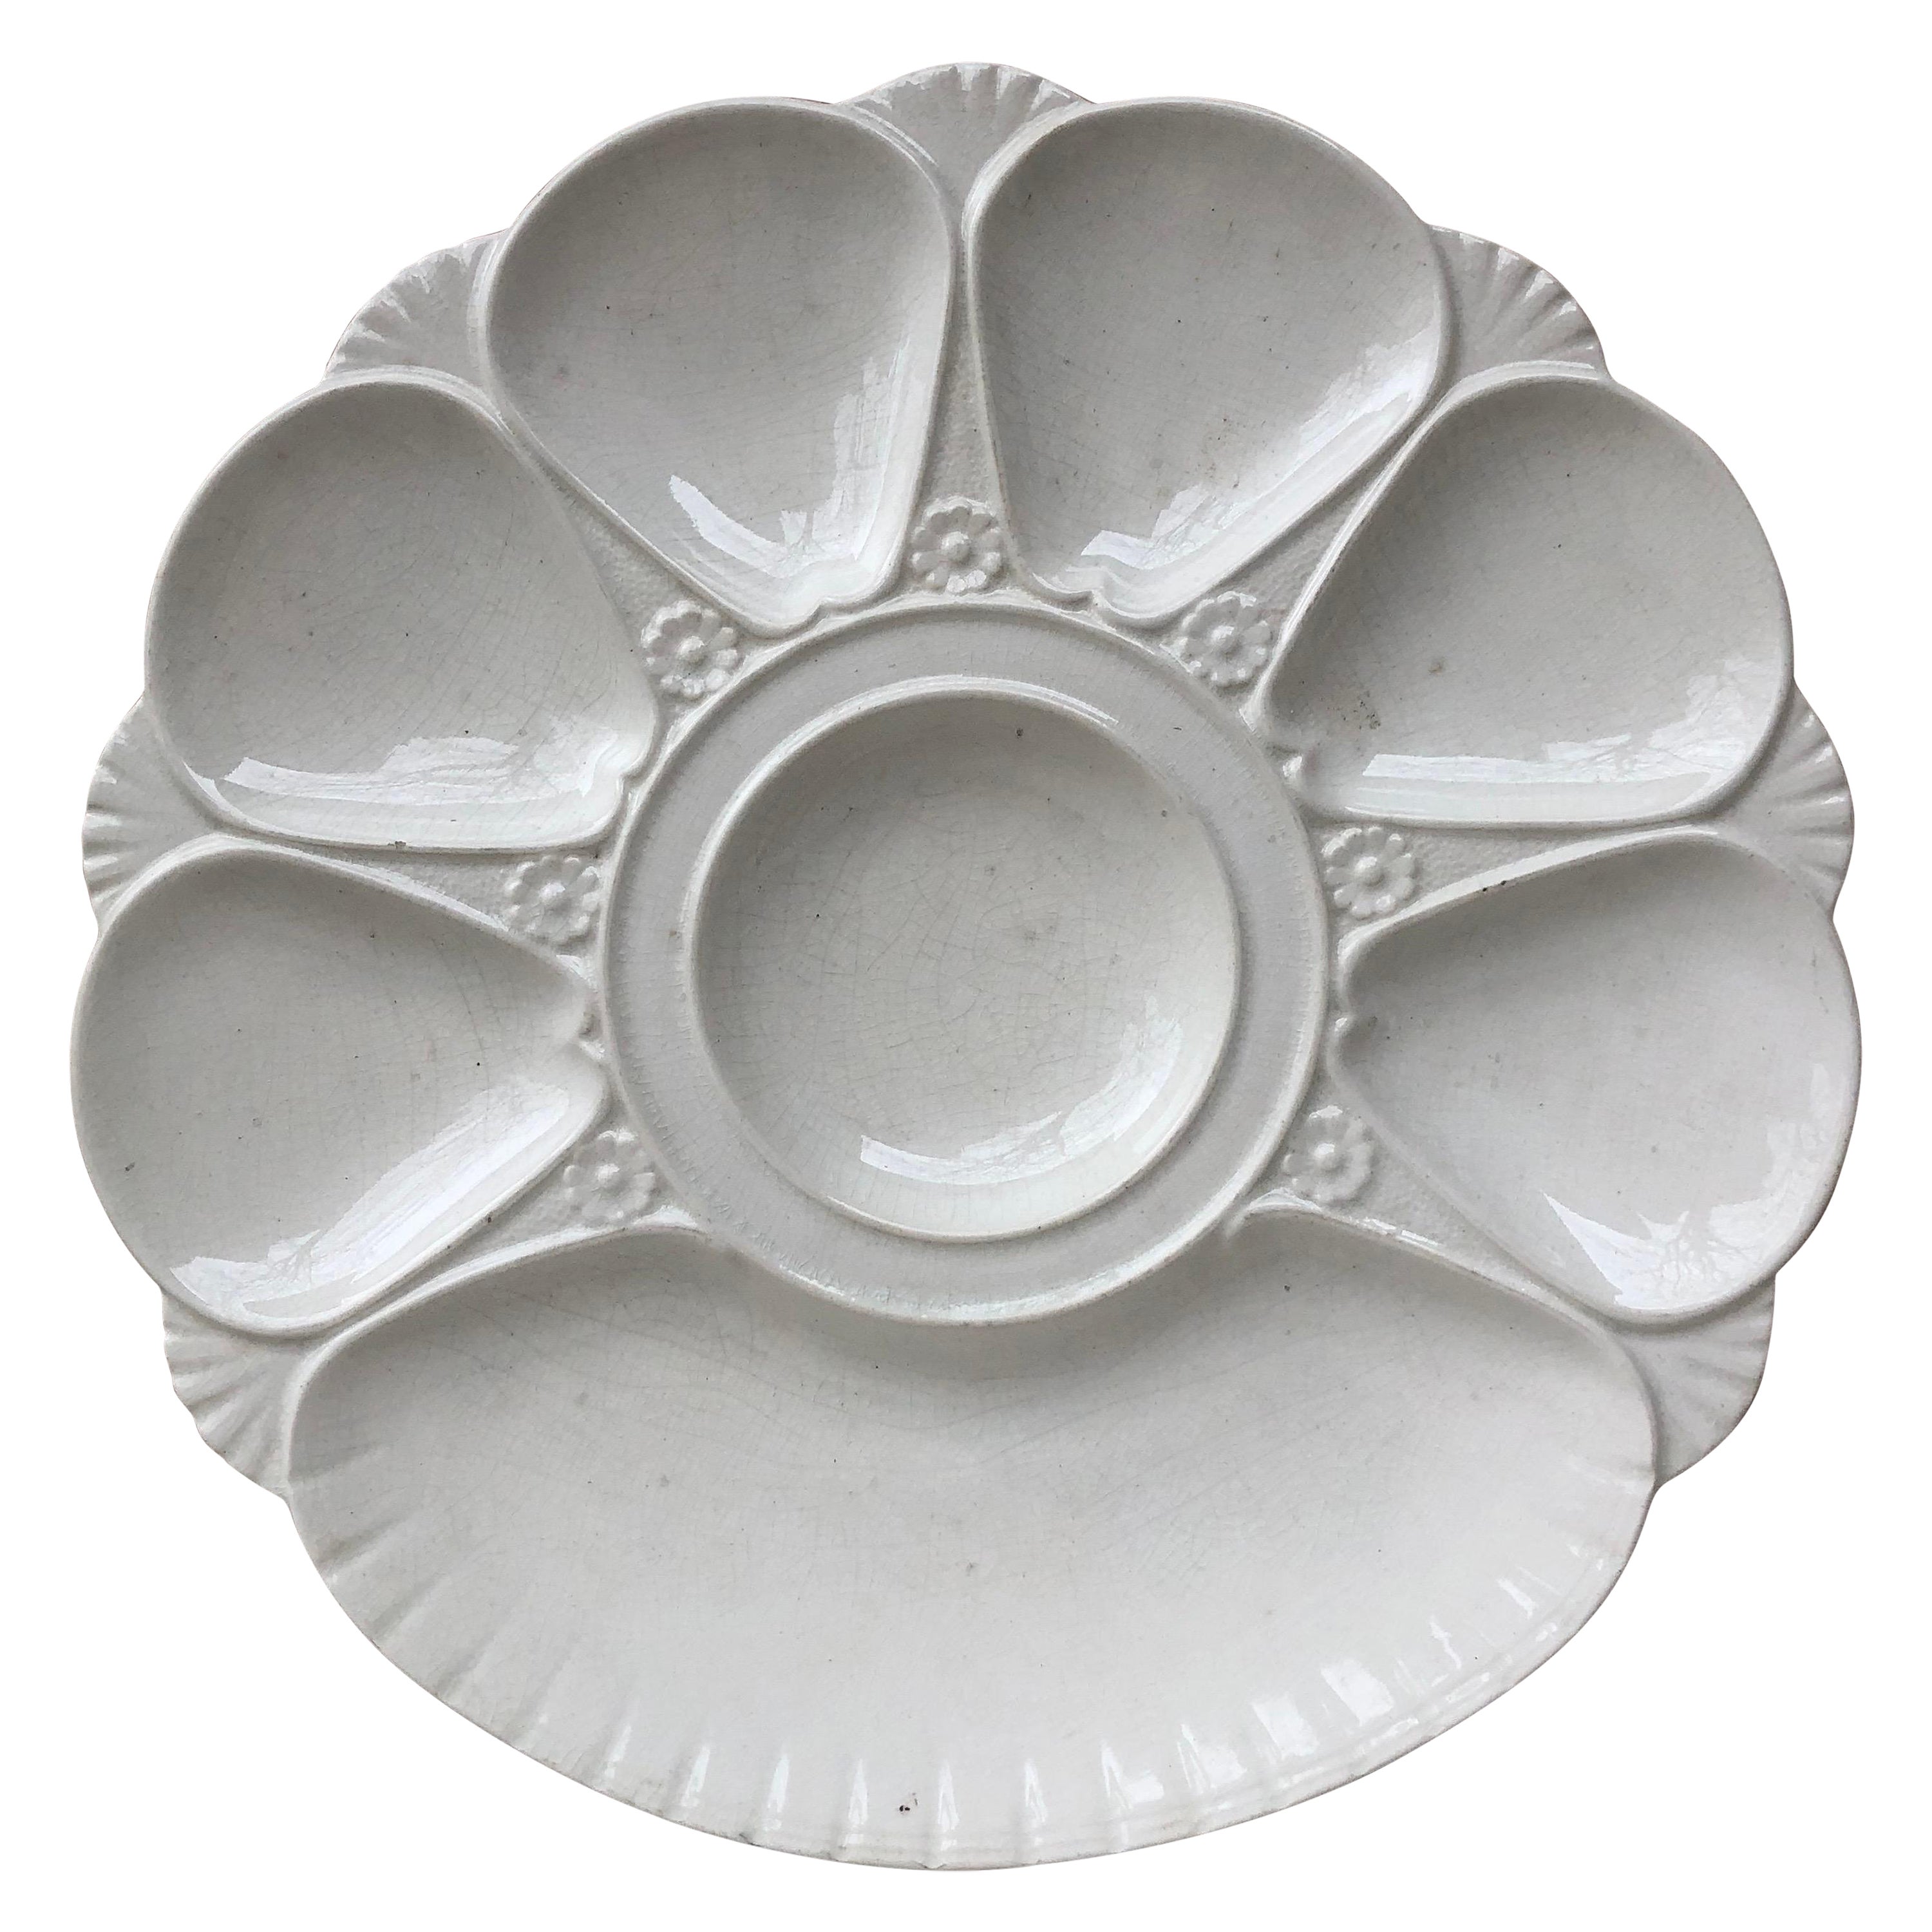 19th Century Minton White Majolica Oyster Plate